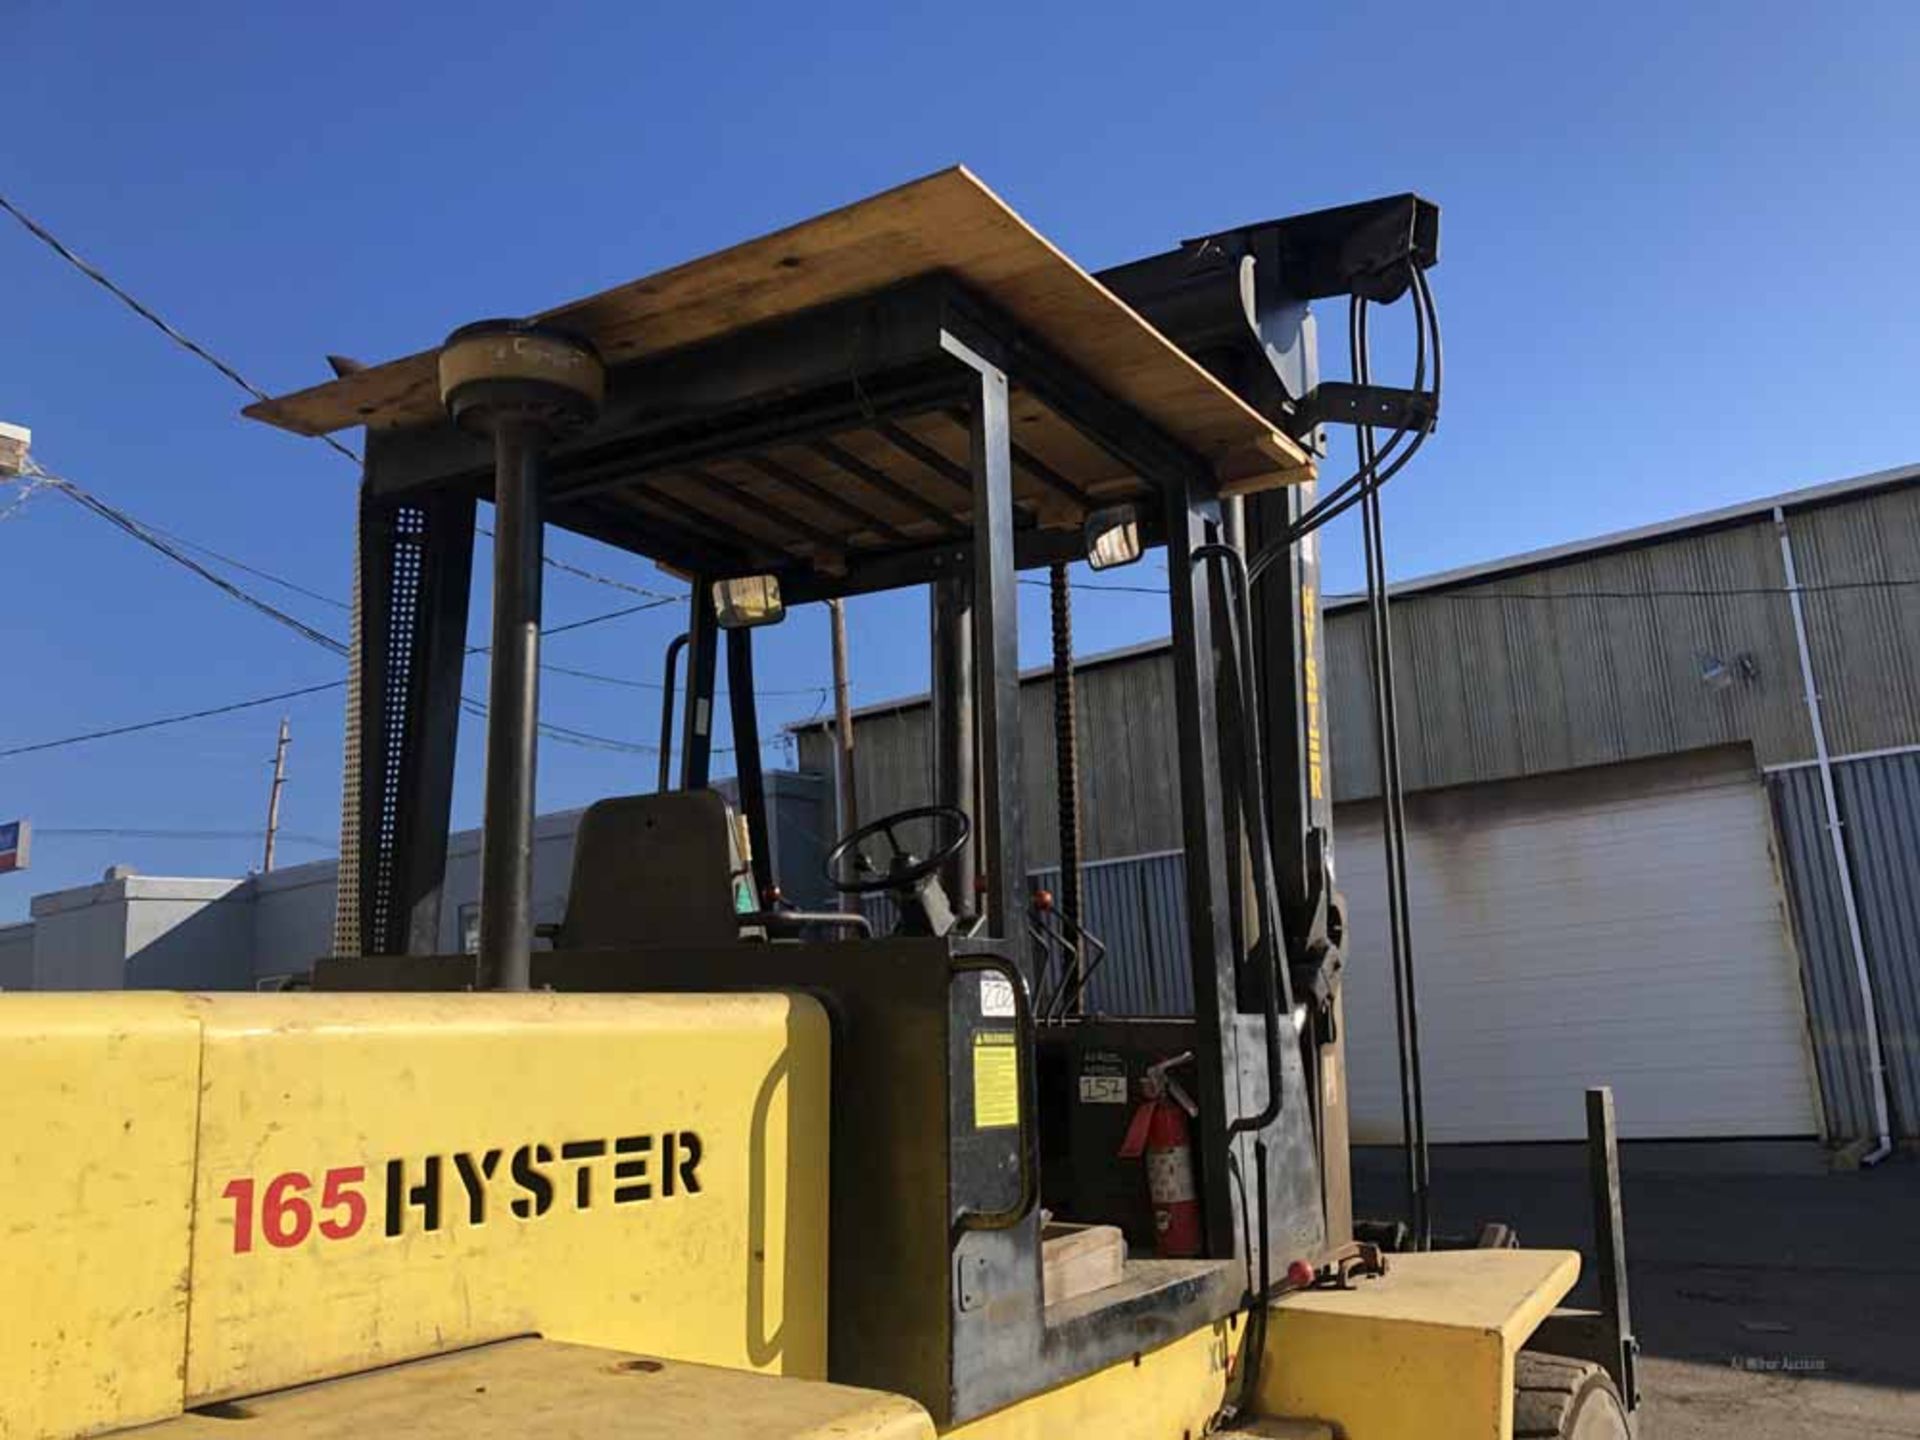 Hyster XL2, Forklift, 804 Hours,26,600 Pounds - Image 4 of 8